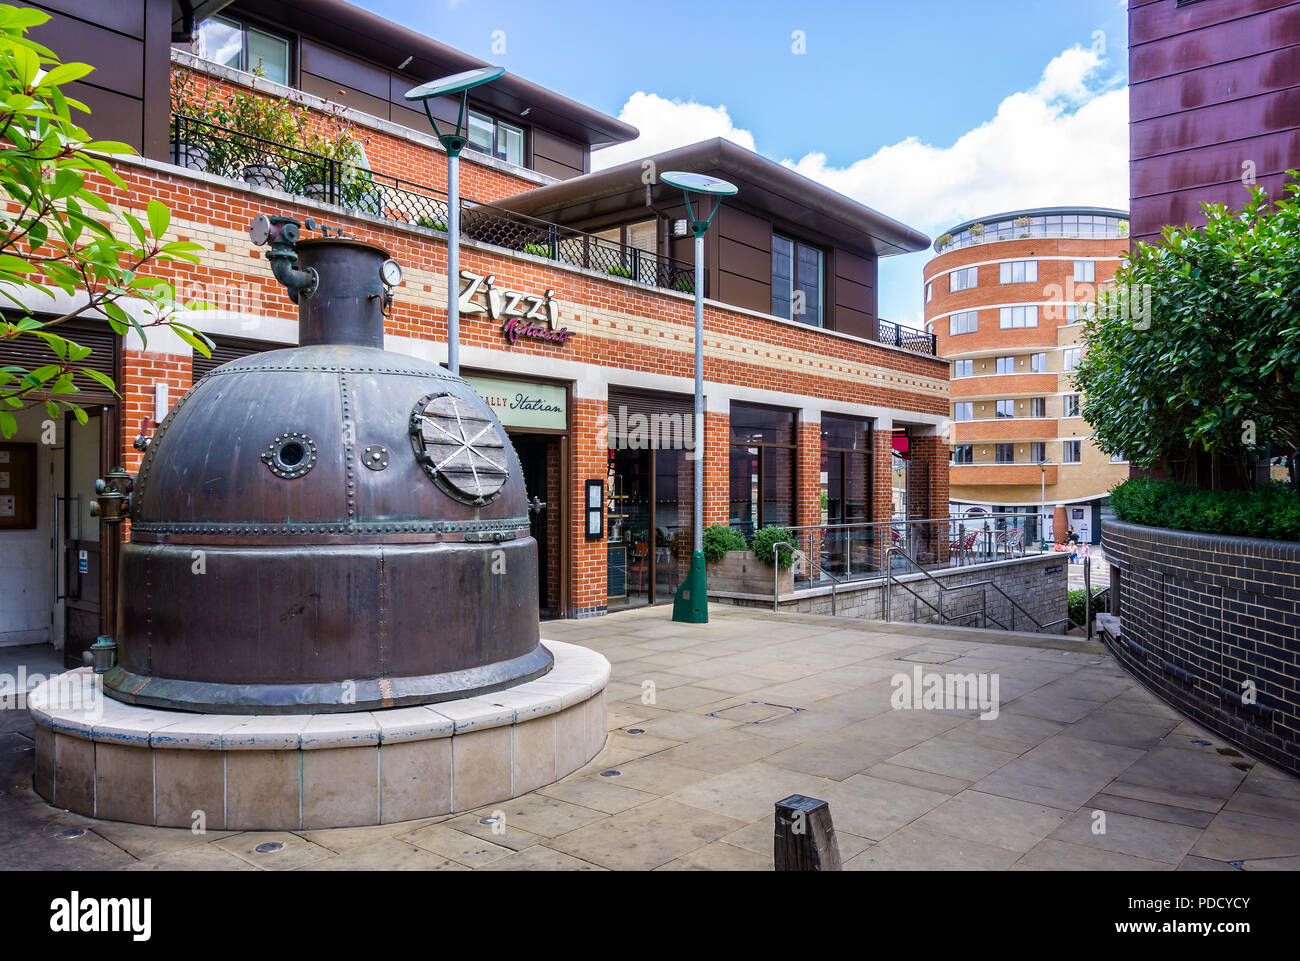 Town centre regeneration of Eldridge Pope Brewery Site - Brewery Square, Dorchester, Dorset, UK on 8 August 2018 Stock Photo